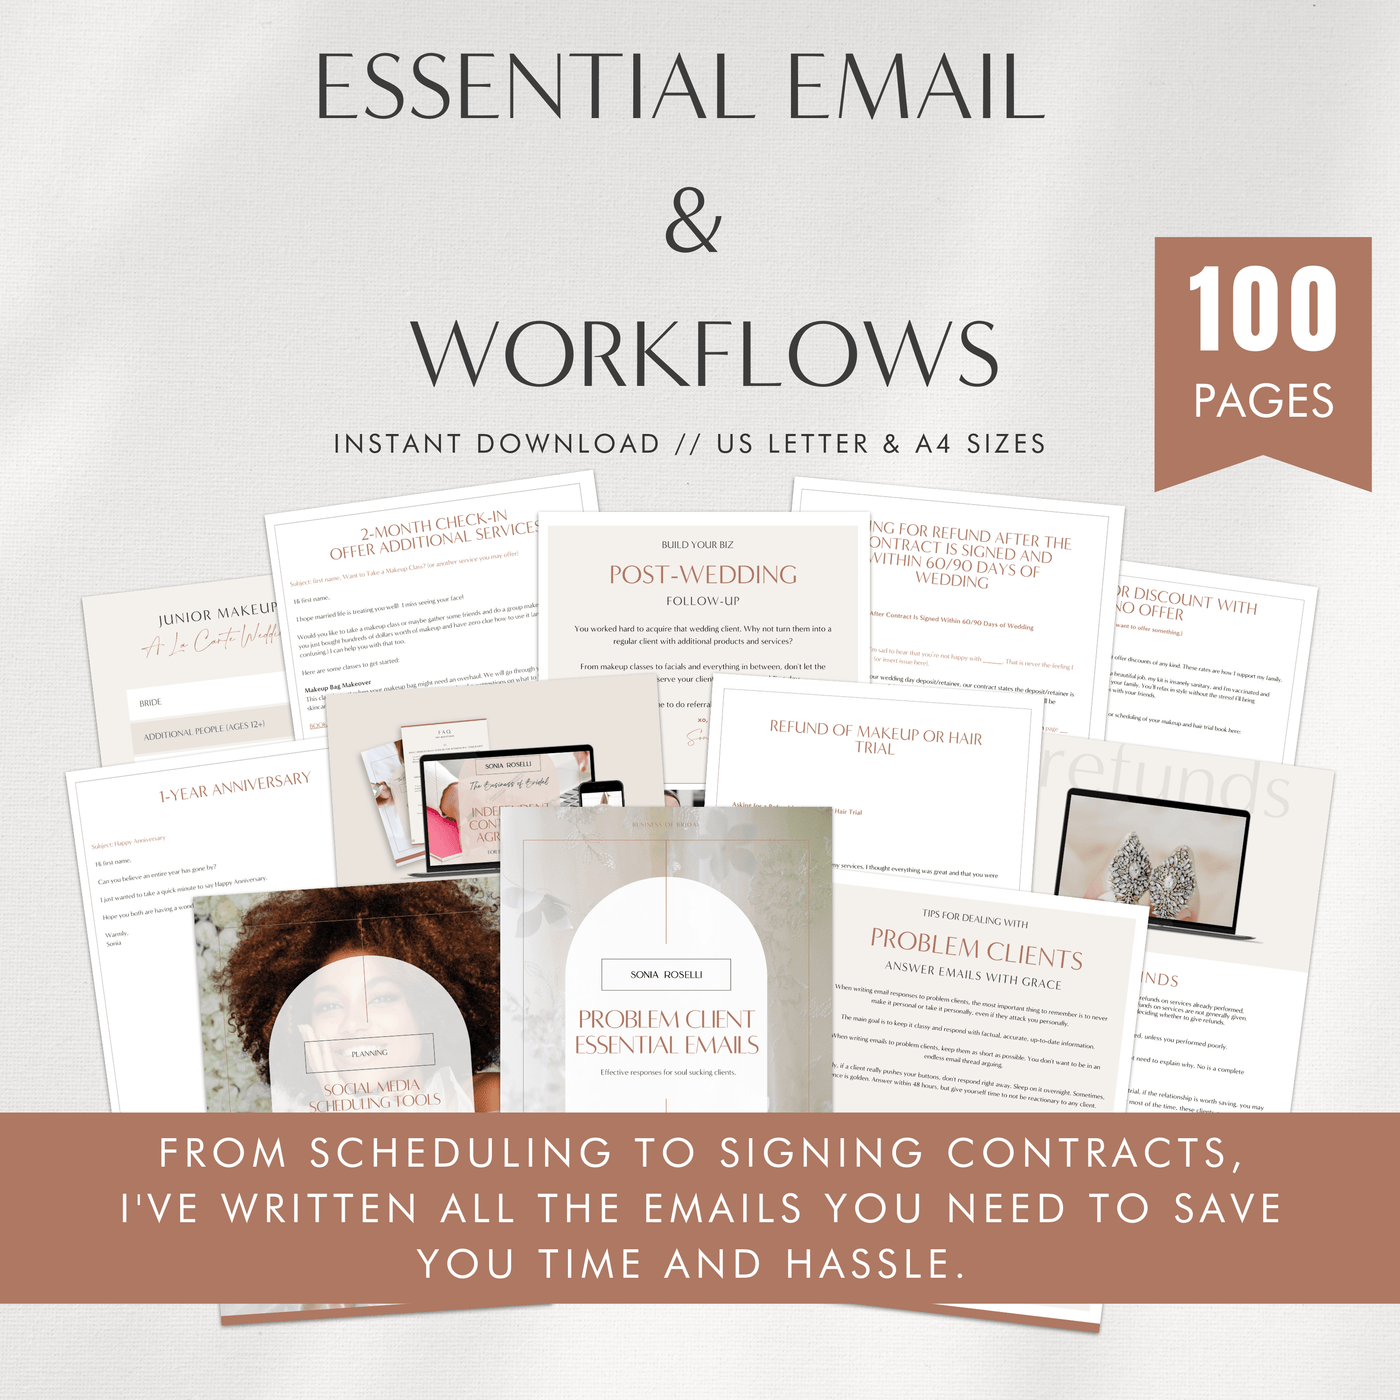 "Essential Email & workflows. From scheduling to signing contracts, I've written all the emails you need"